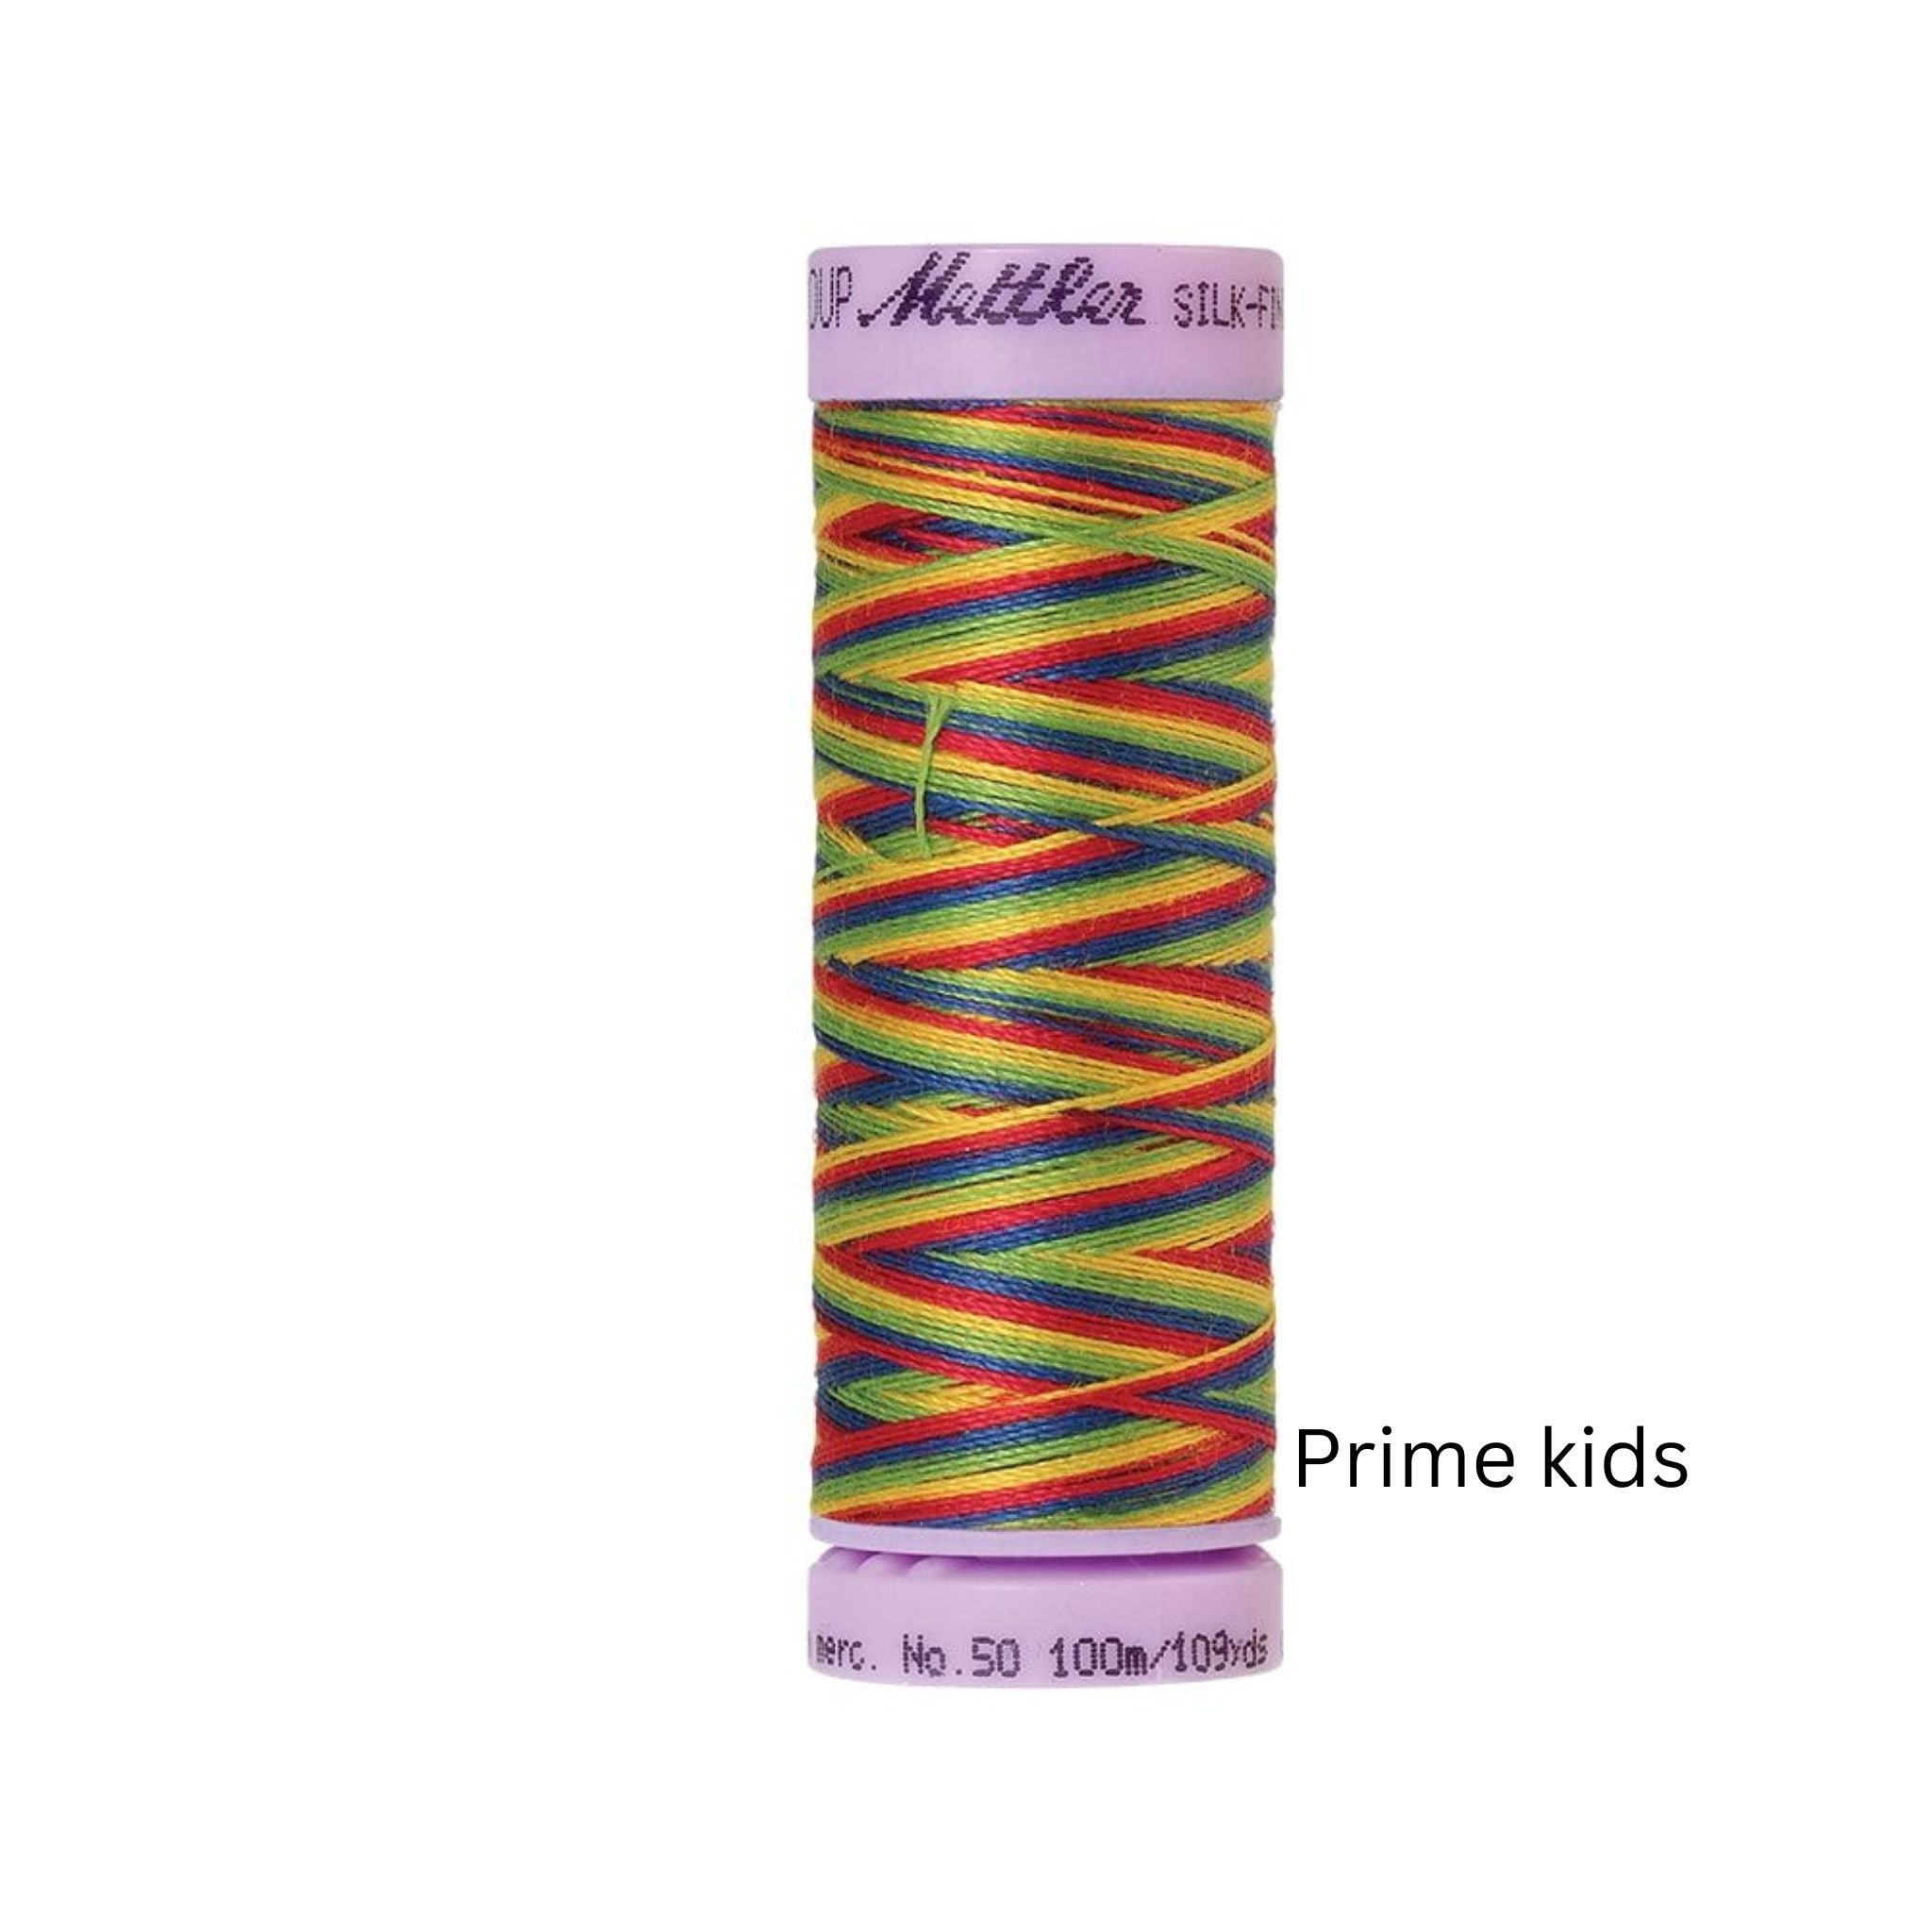 Prime Kids silk thread with  red, yellow, green and dark blue for sewing machines - 100 Metres - Mettler